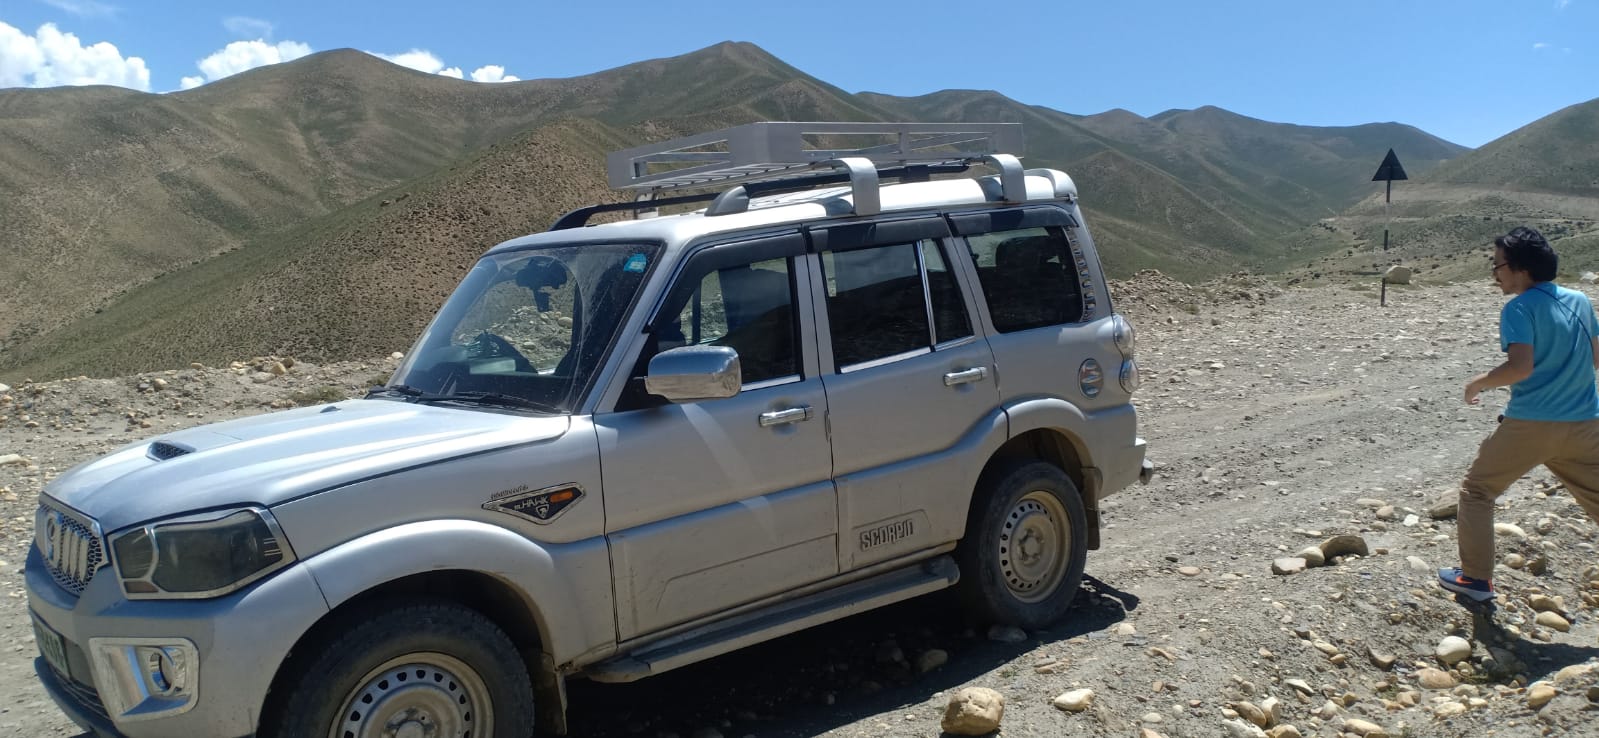 Upper Mustang Jeep Tour in Nepal